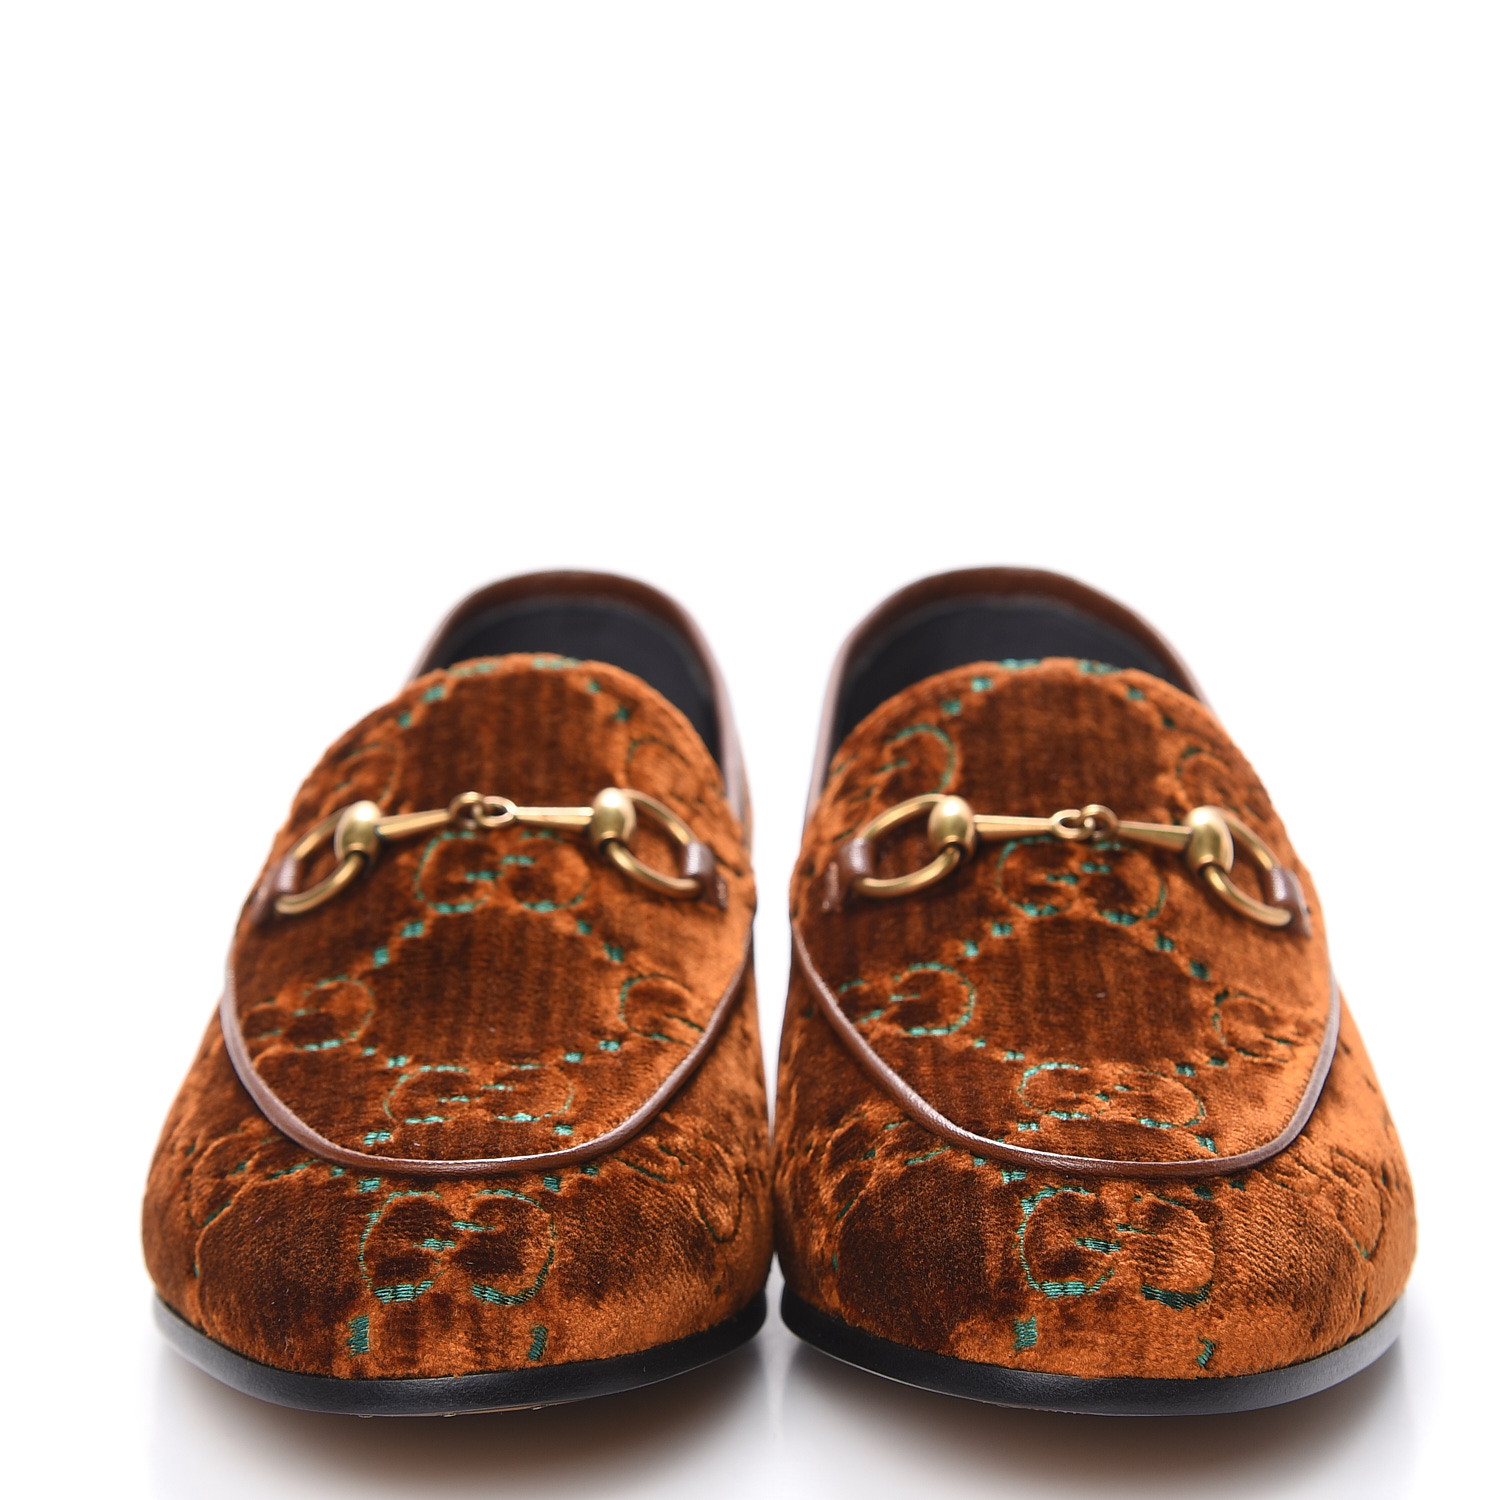 gucci cognac loafers